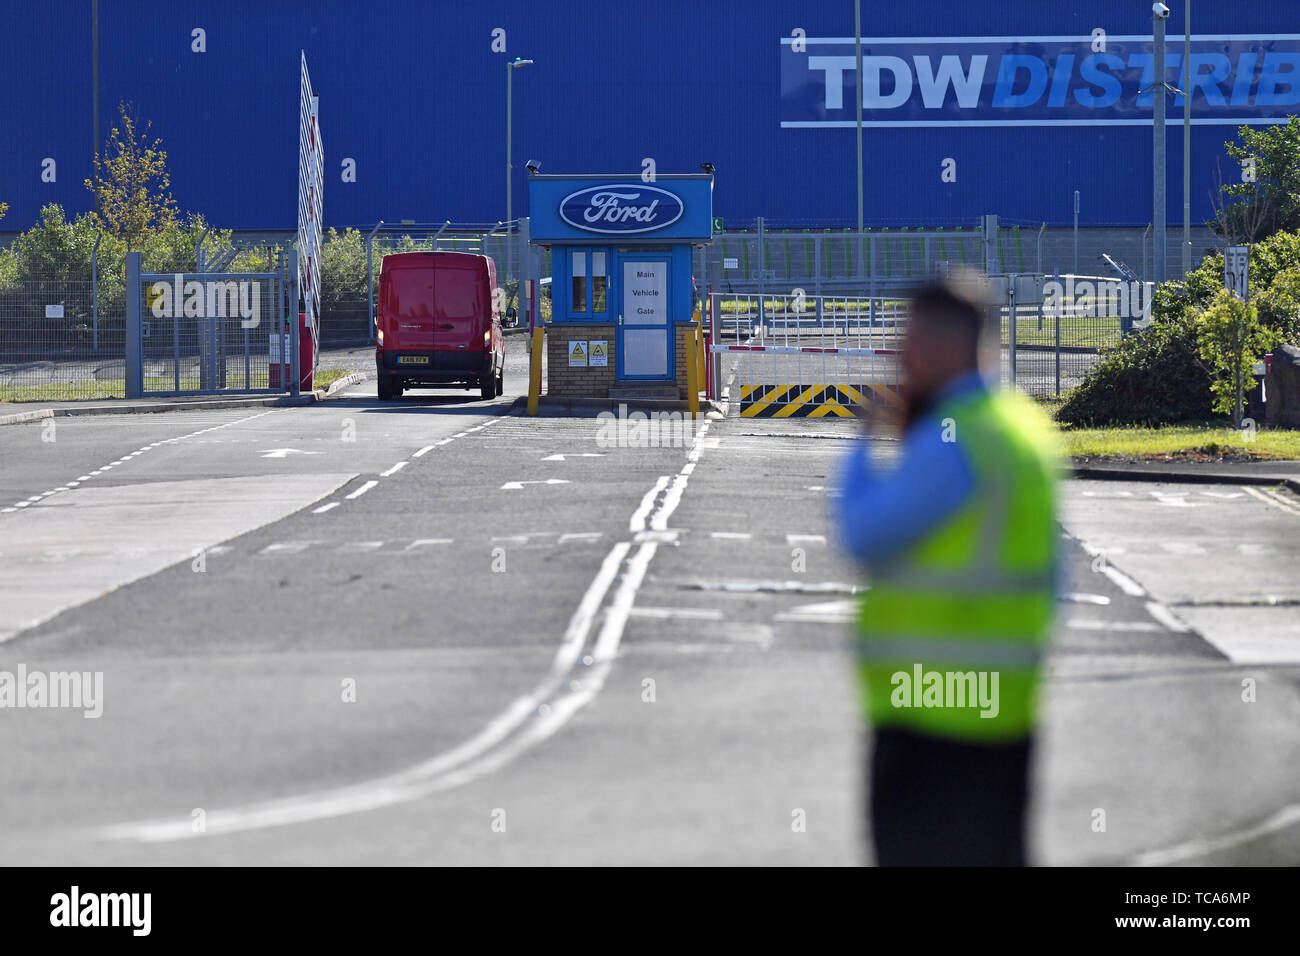 The Ford engine plant near Bridgend, south Wales, where around 1,500 jobs are affected, as unions have expressed shock at an expected announcement that the car giant is to close one of its UK factories with heavy job losses. Stock Photo